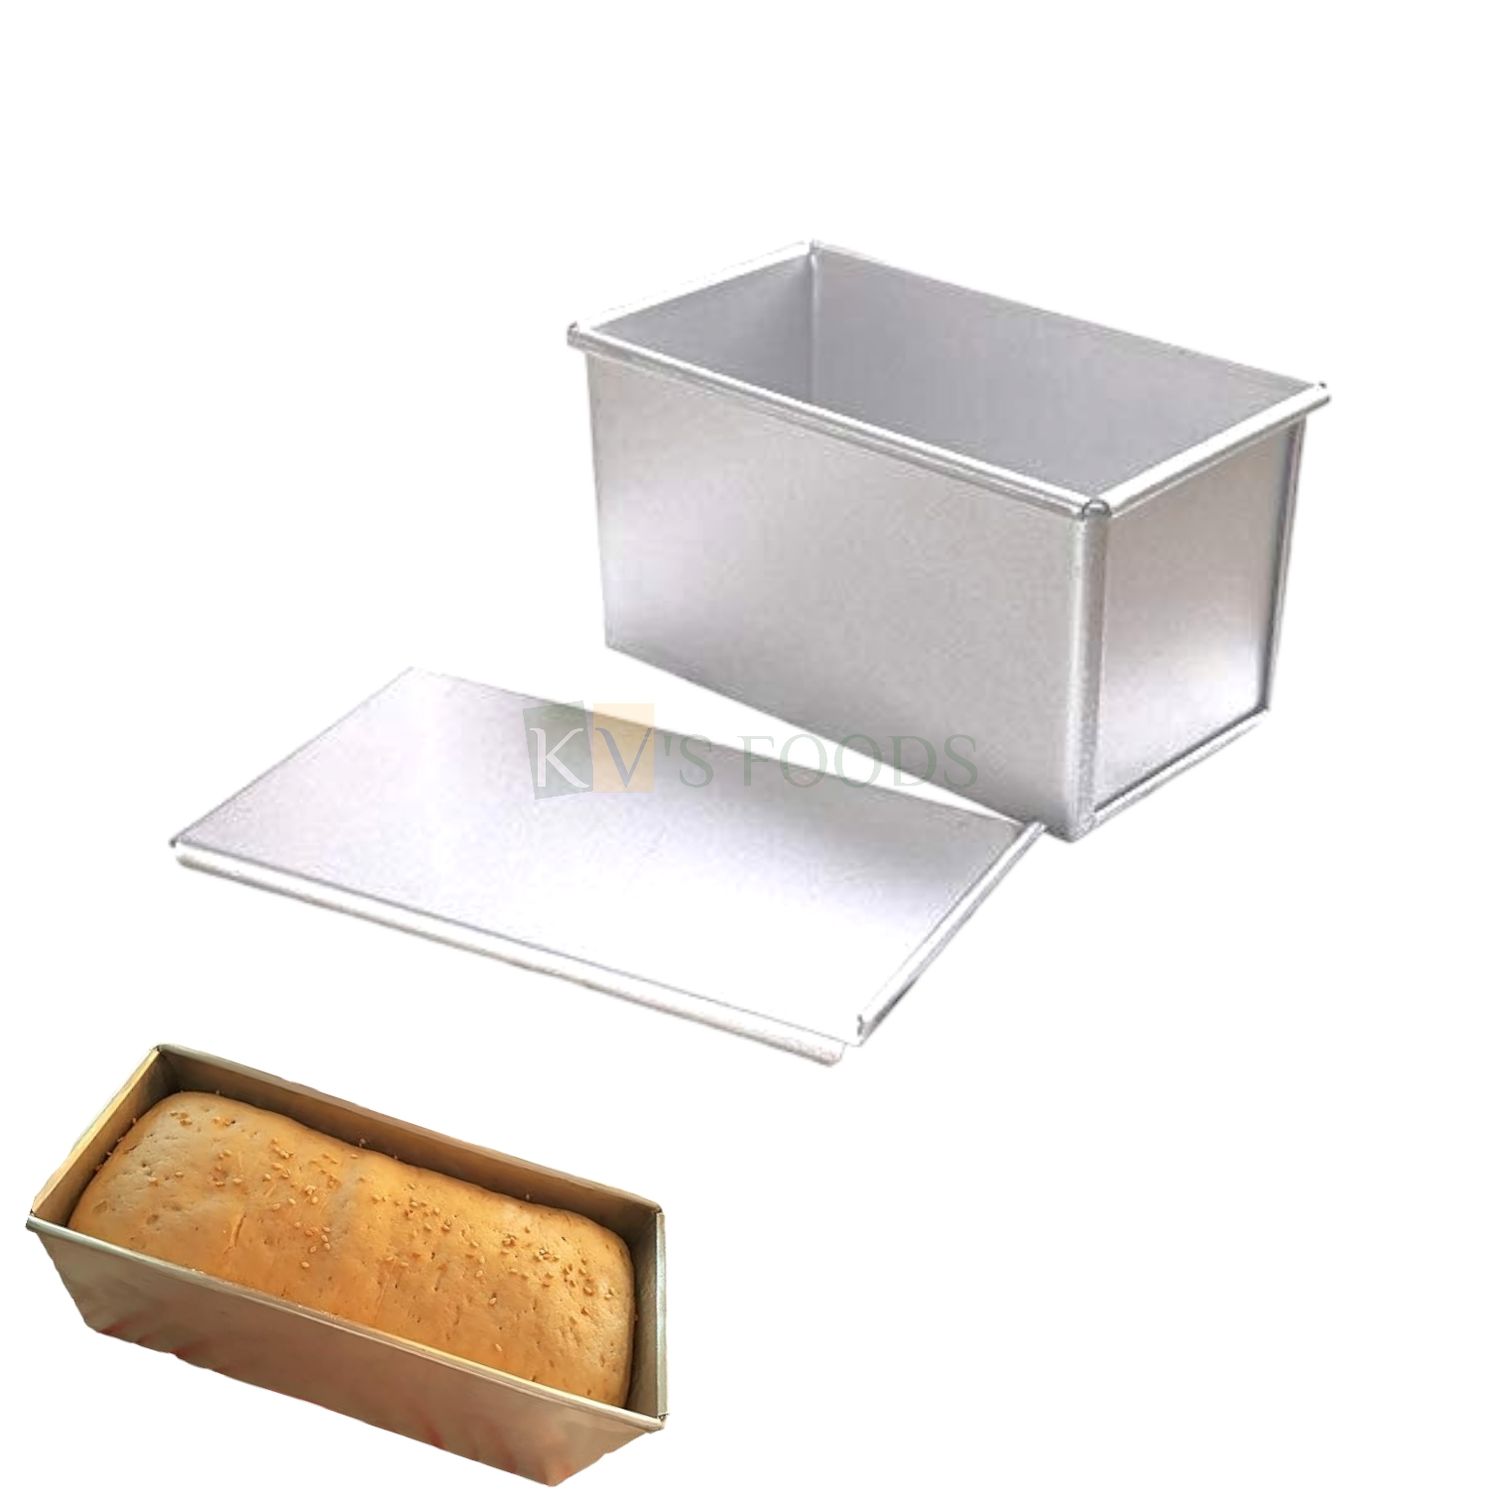 1PC Size 5.9 x 3 x 2.9 Inch Capacity ~ 250 gms, Baking Aluminium Small Bread Cake Rectangular Mould With Lid, Panettone Bun Cake Bakeware Pan for Loafs, Bar Mousse Pudding Cheese Brownies Tins Tray